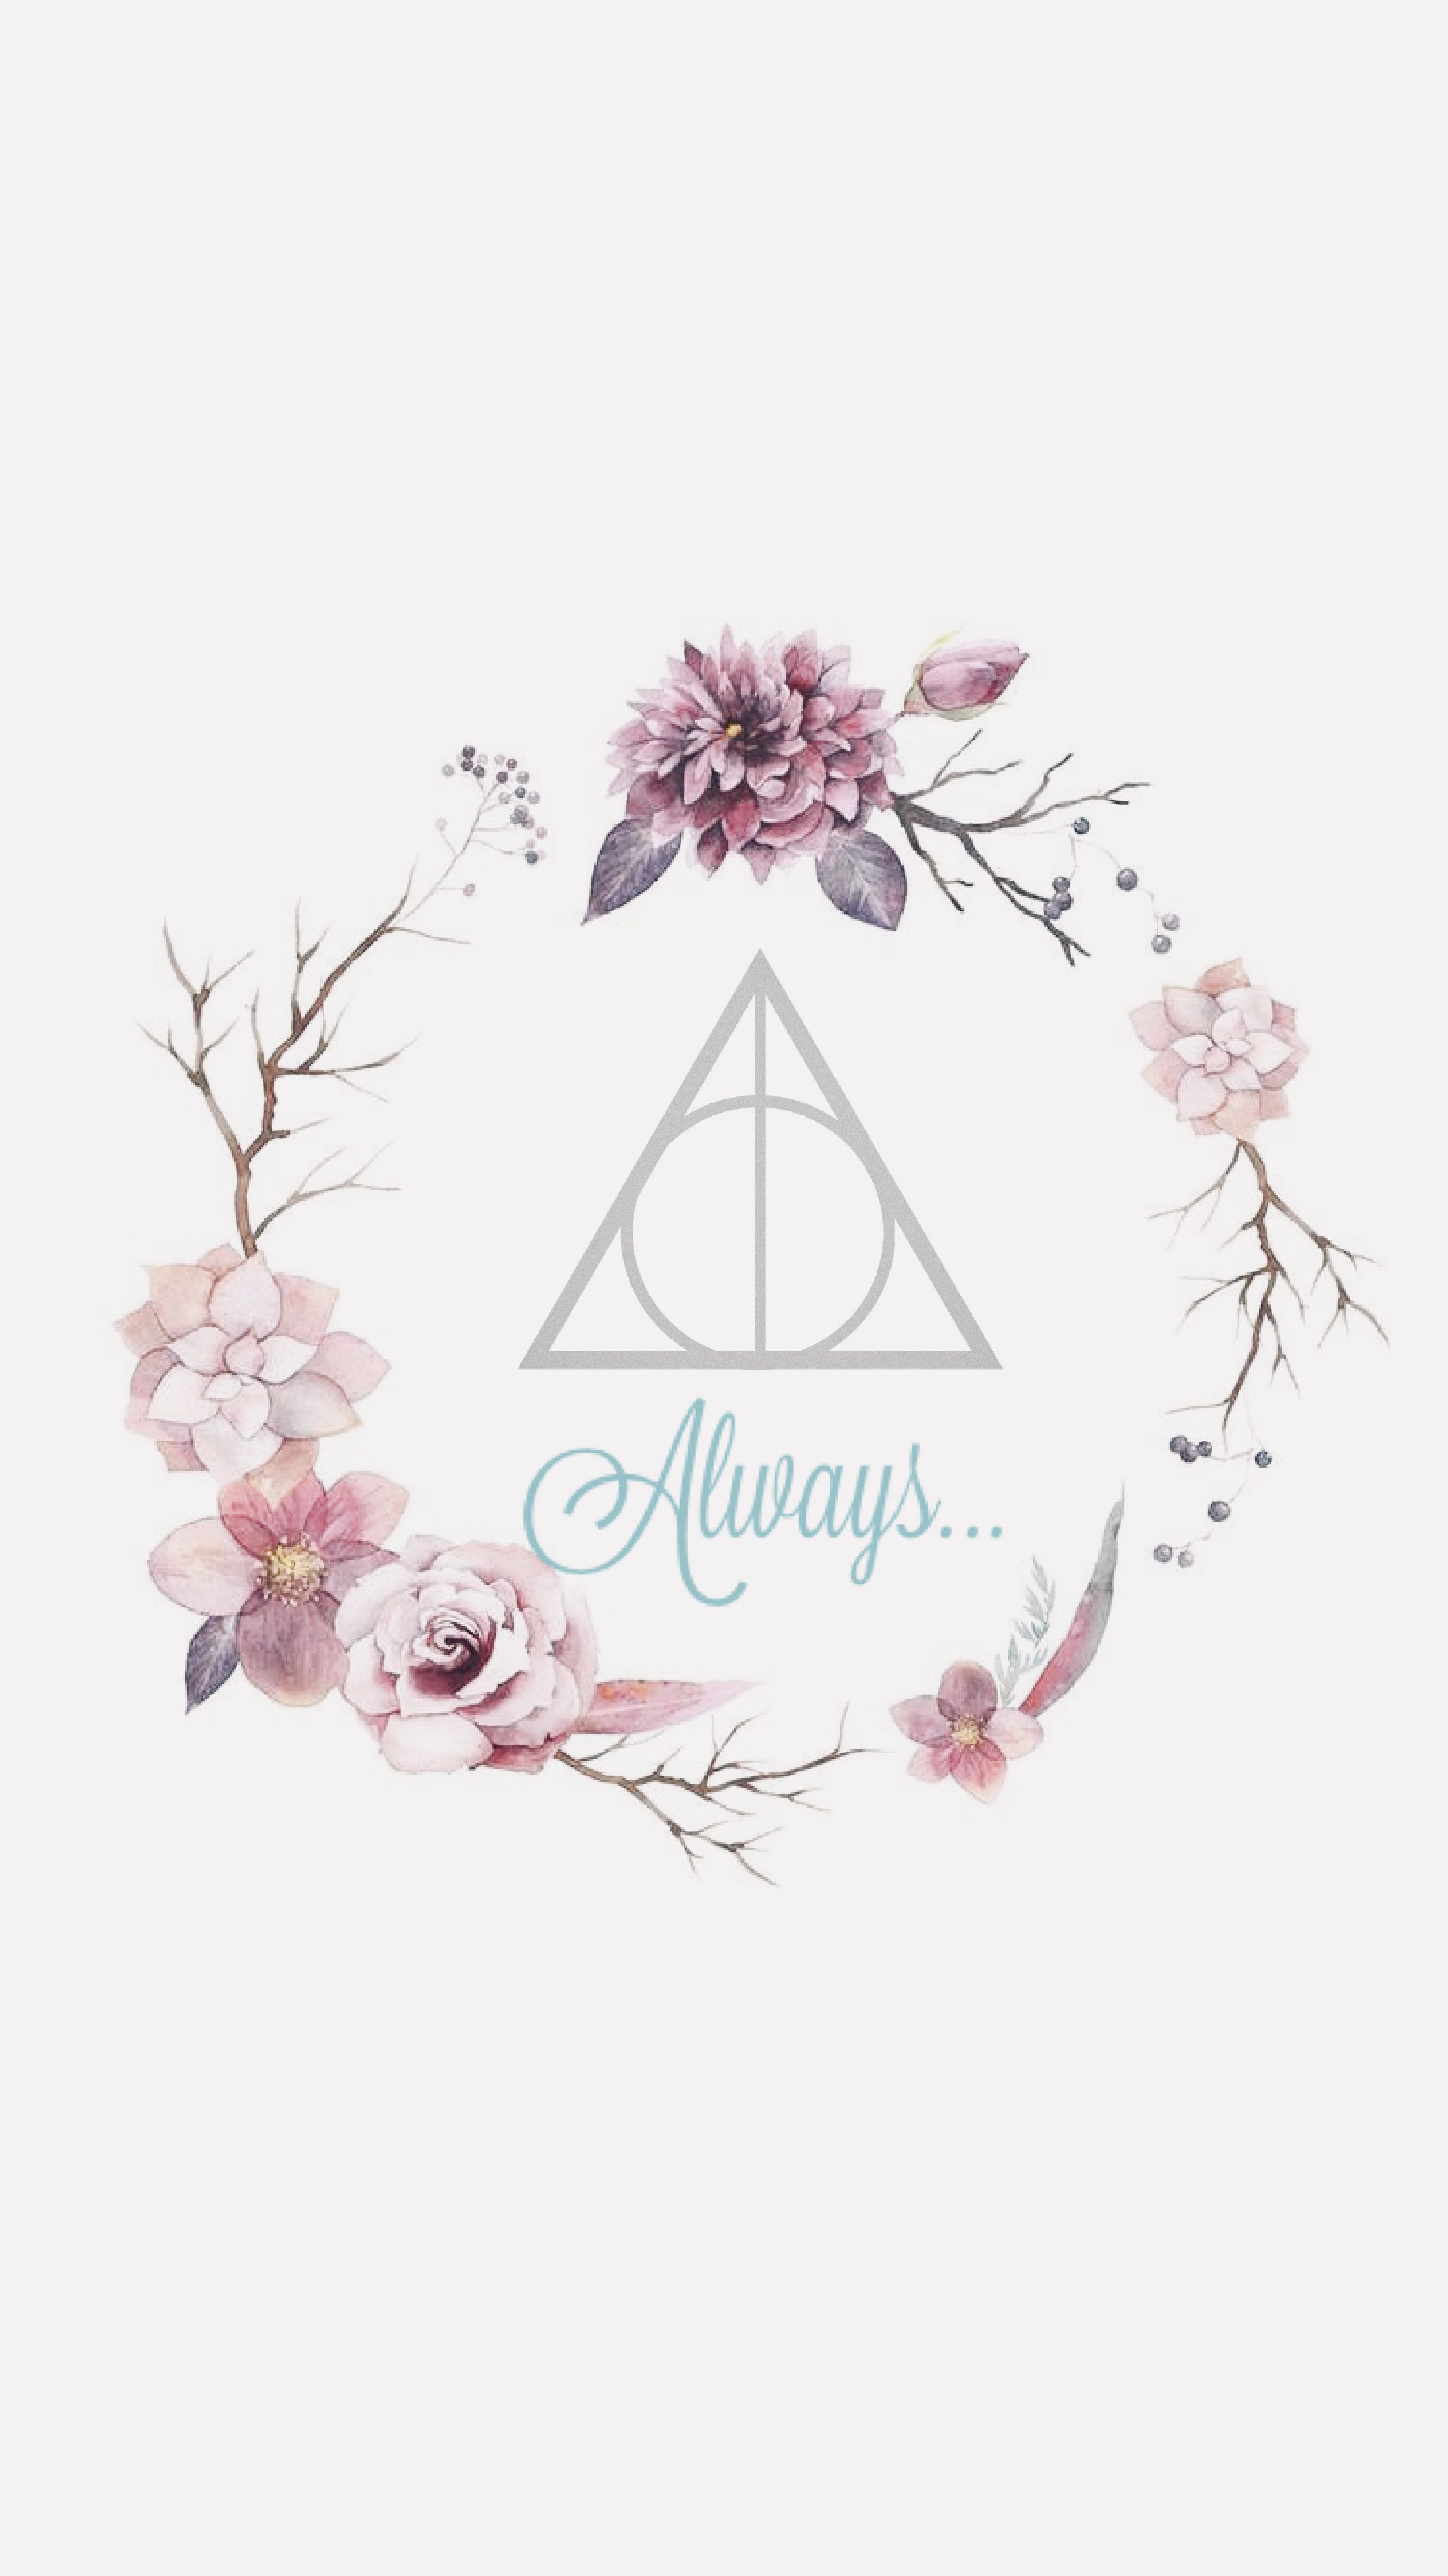 Harry Potter Cute Wallpapers - Wallpaper Cave